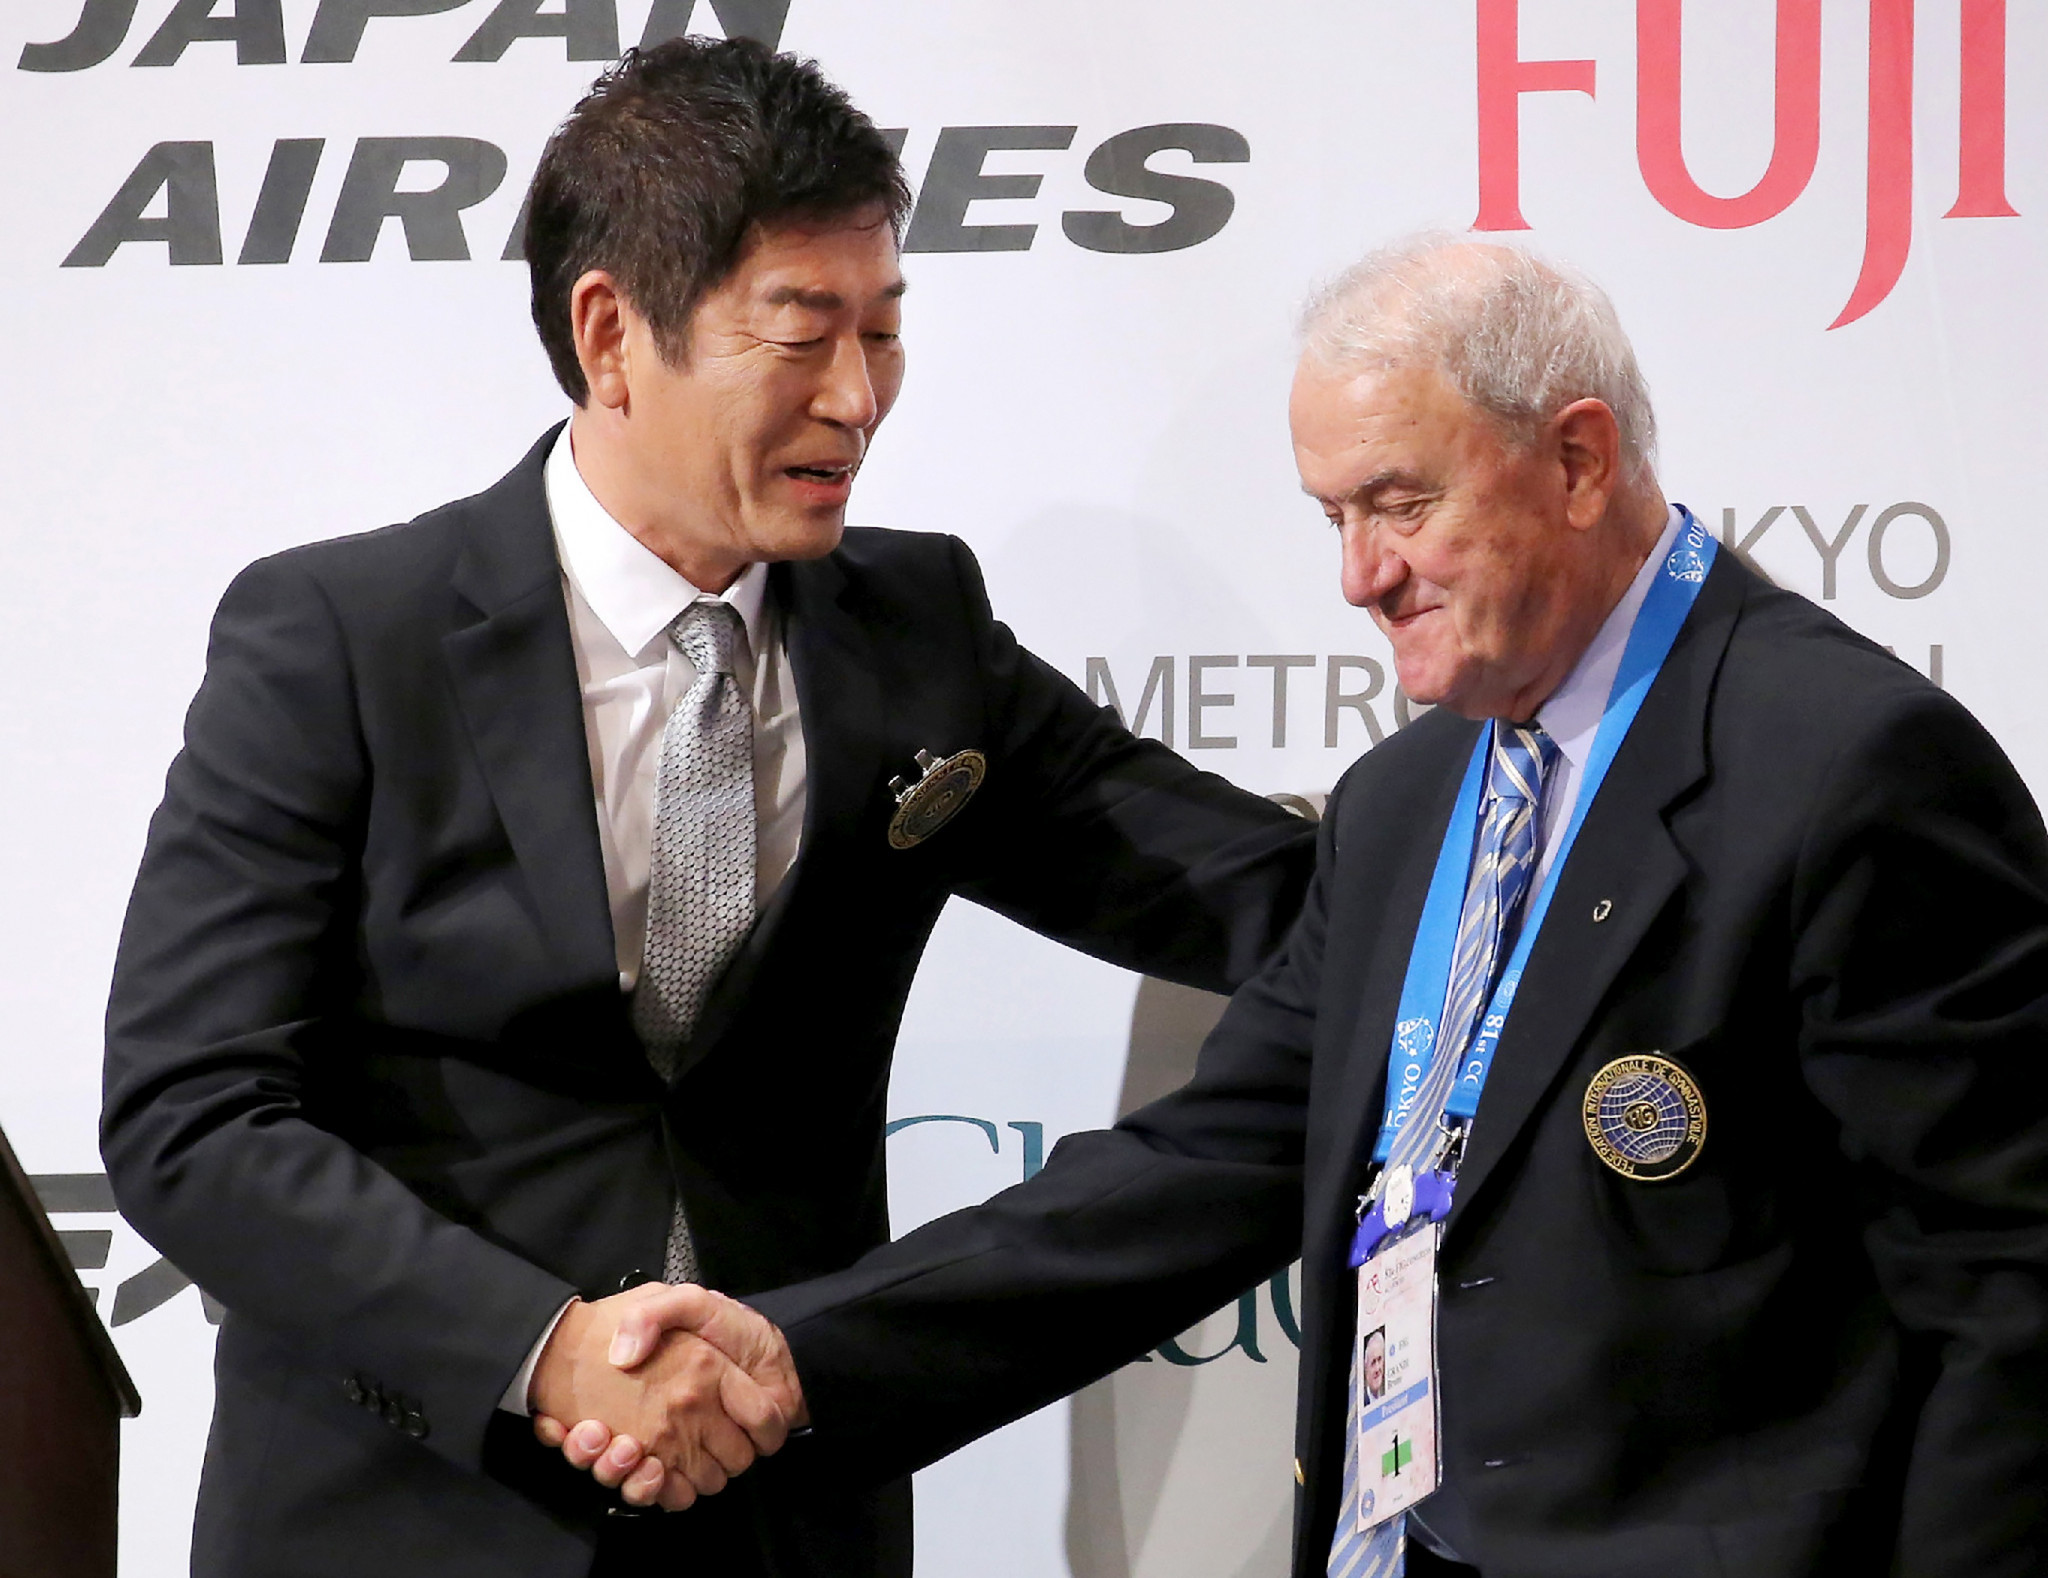 Morinari Watanabe, left, is the first IOC member from FIG since Bruno Grandi, right ©Getty Images